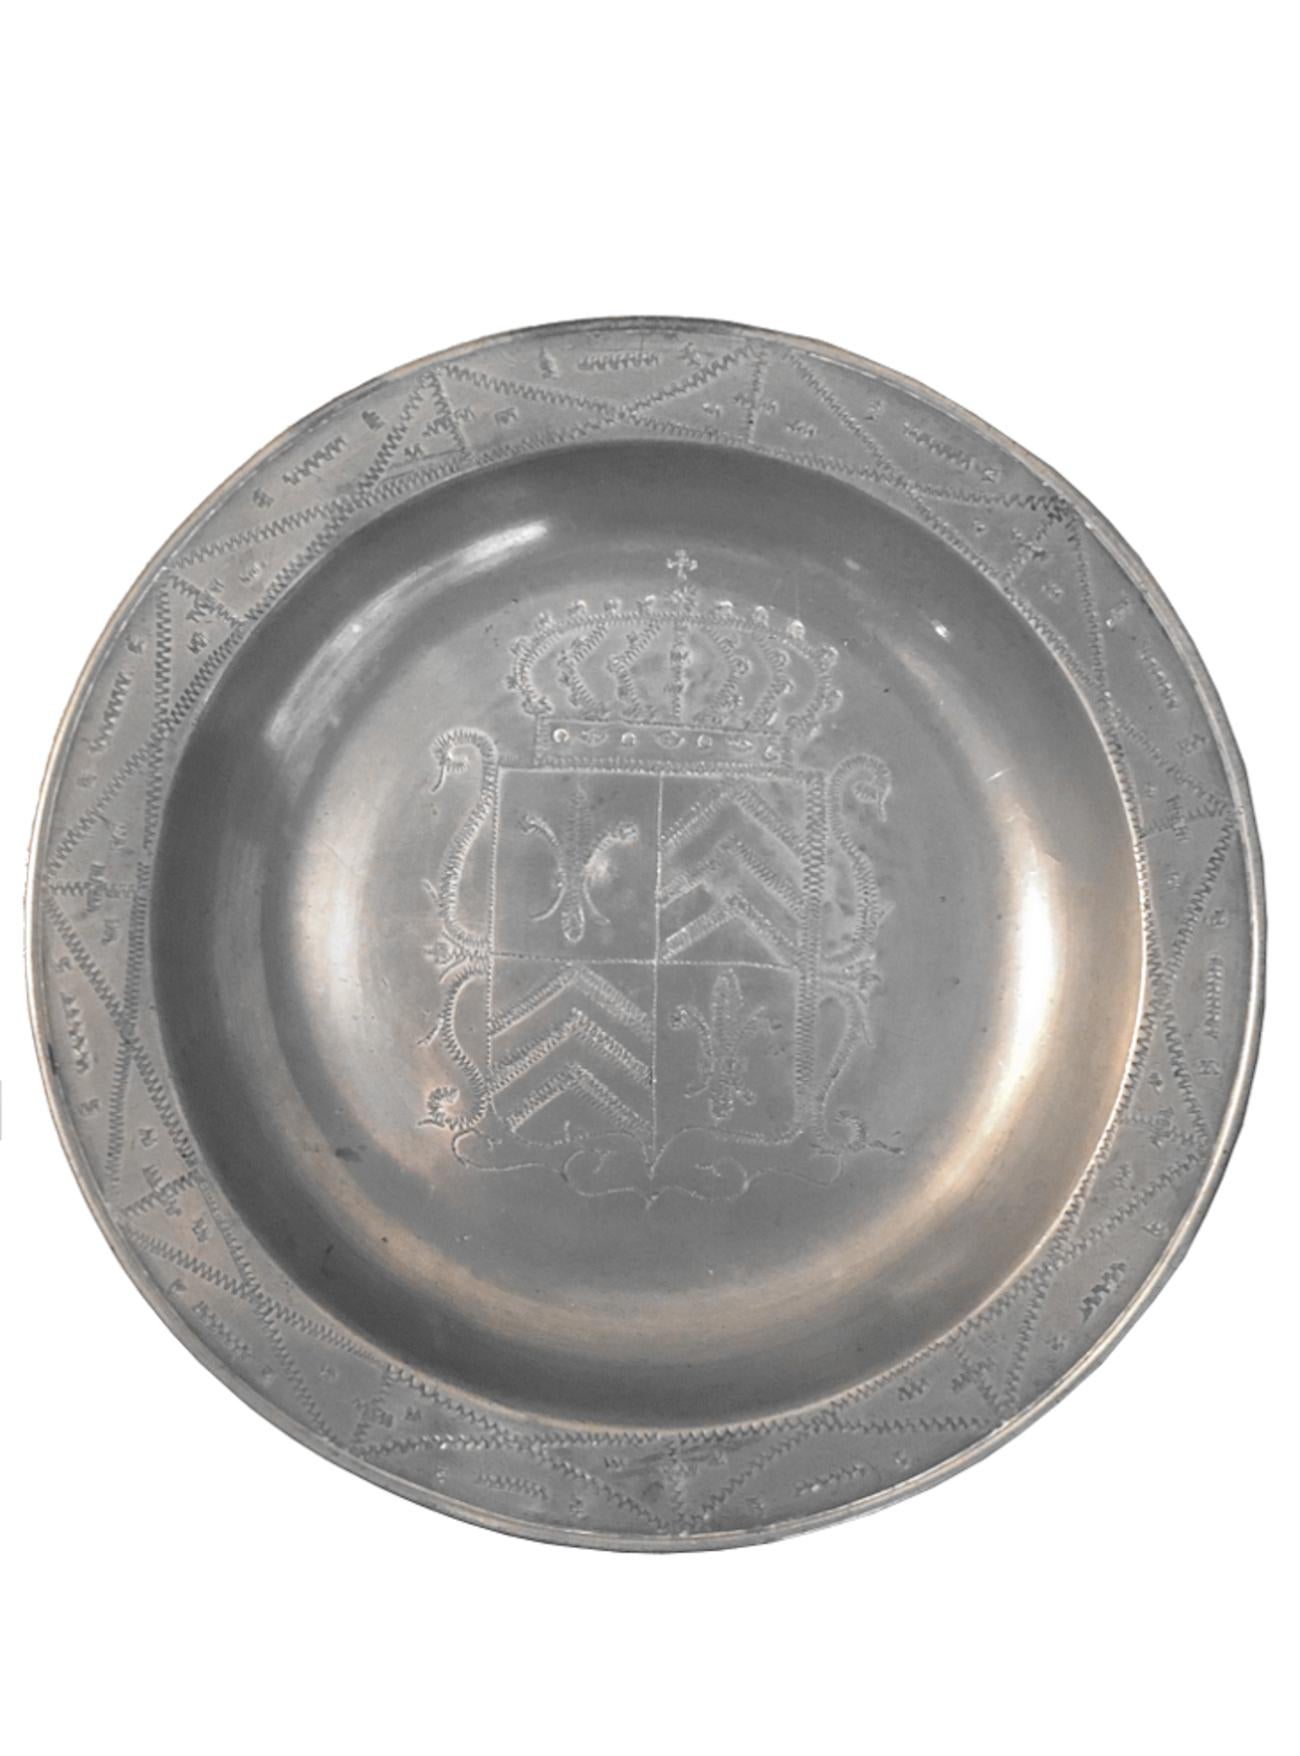 Pewter deep dish with crowned coat of arms with fleur de lys and Chevrons in the center. The
crown topped by a cross is possibly ducal. Chiseled rim. There is a crowned mark almost
obliterated by use on the back of the dish.
Origin: